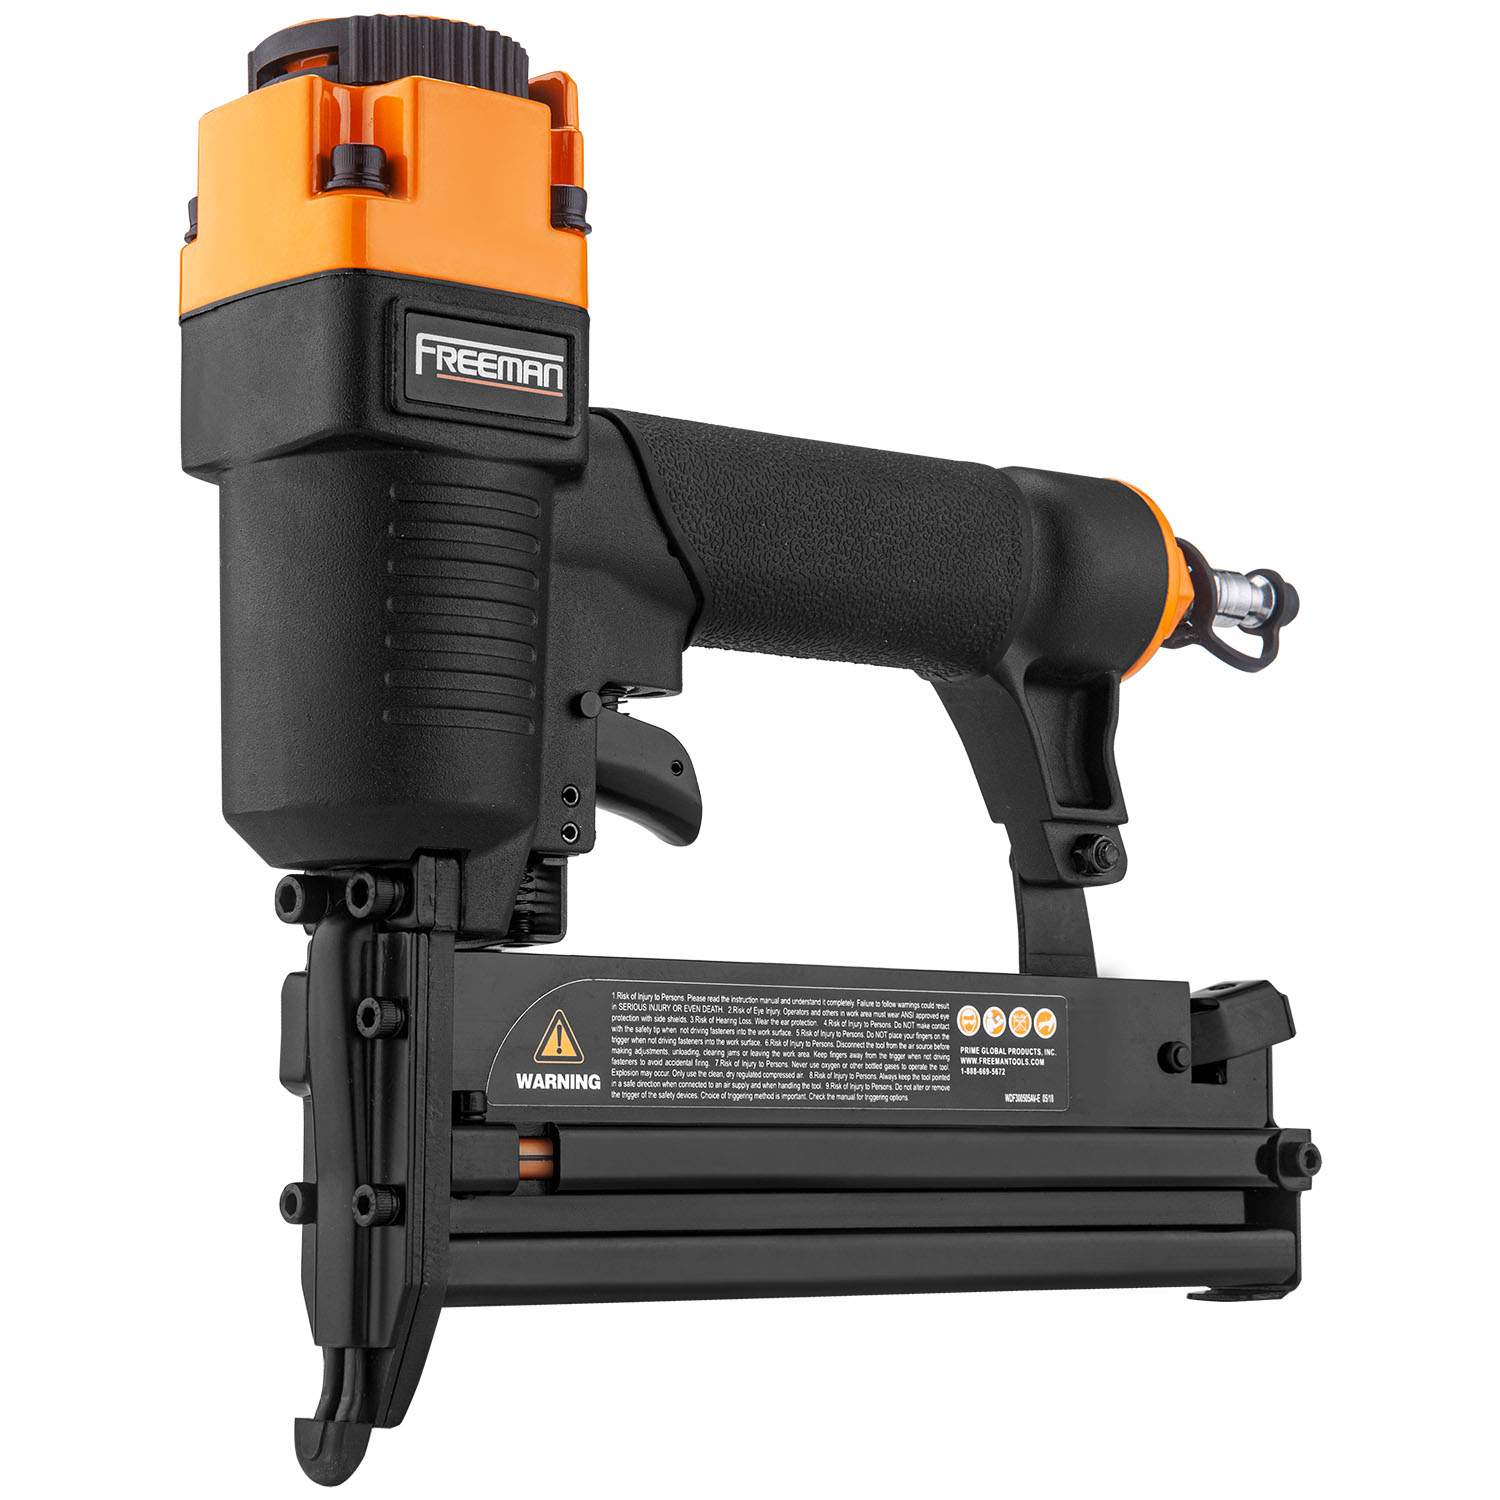 Pneumatic 18-Gauge 2-in-1 Brad Nailer and Stapler with Fasteners 